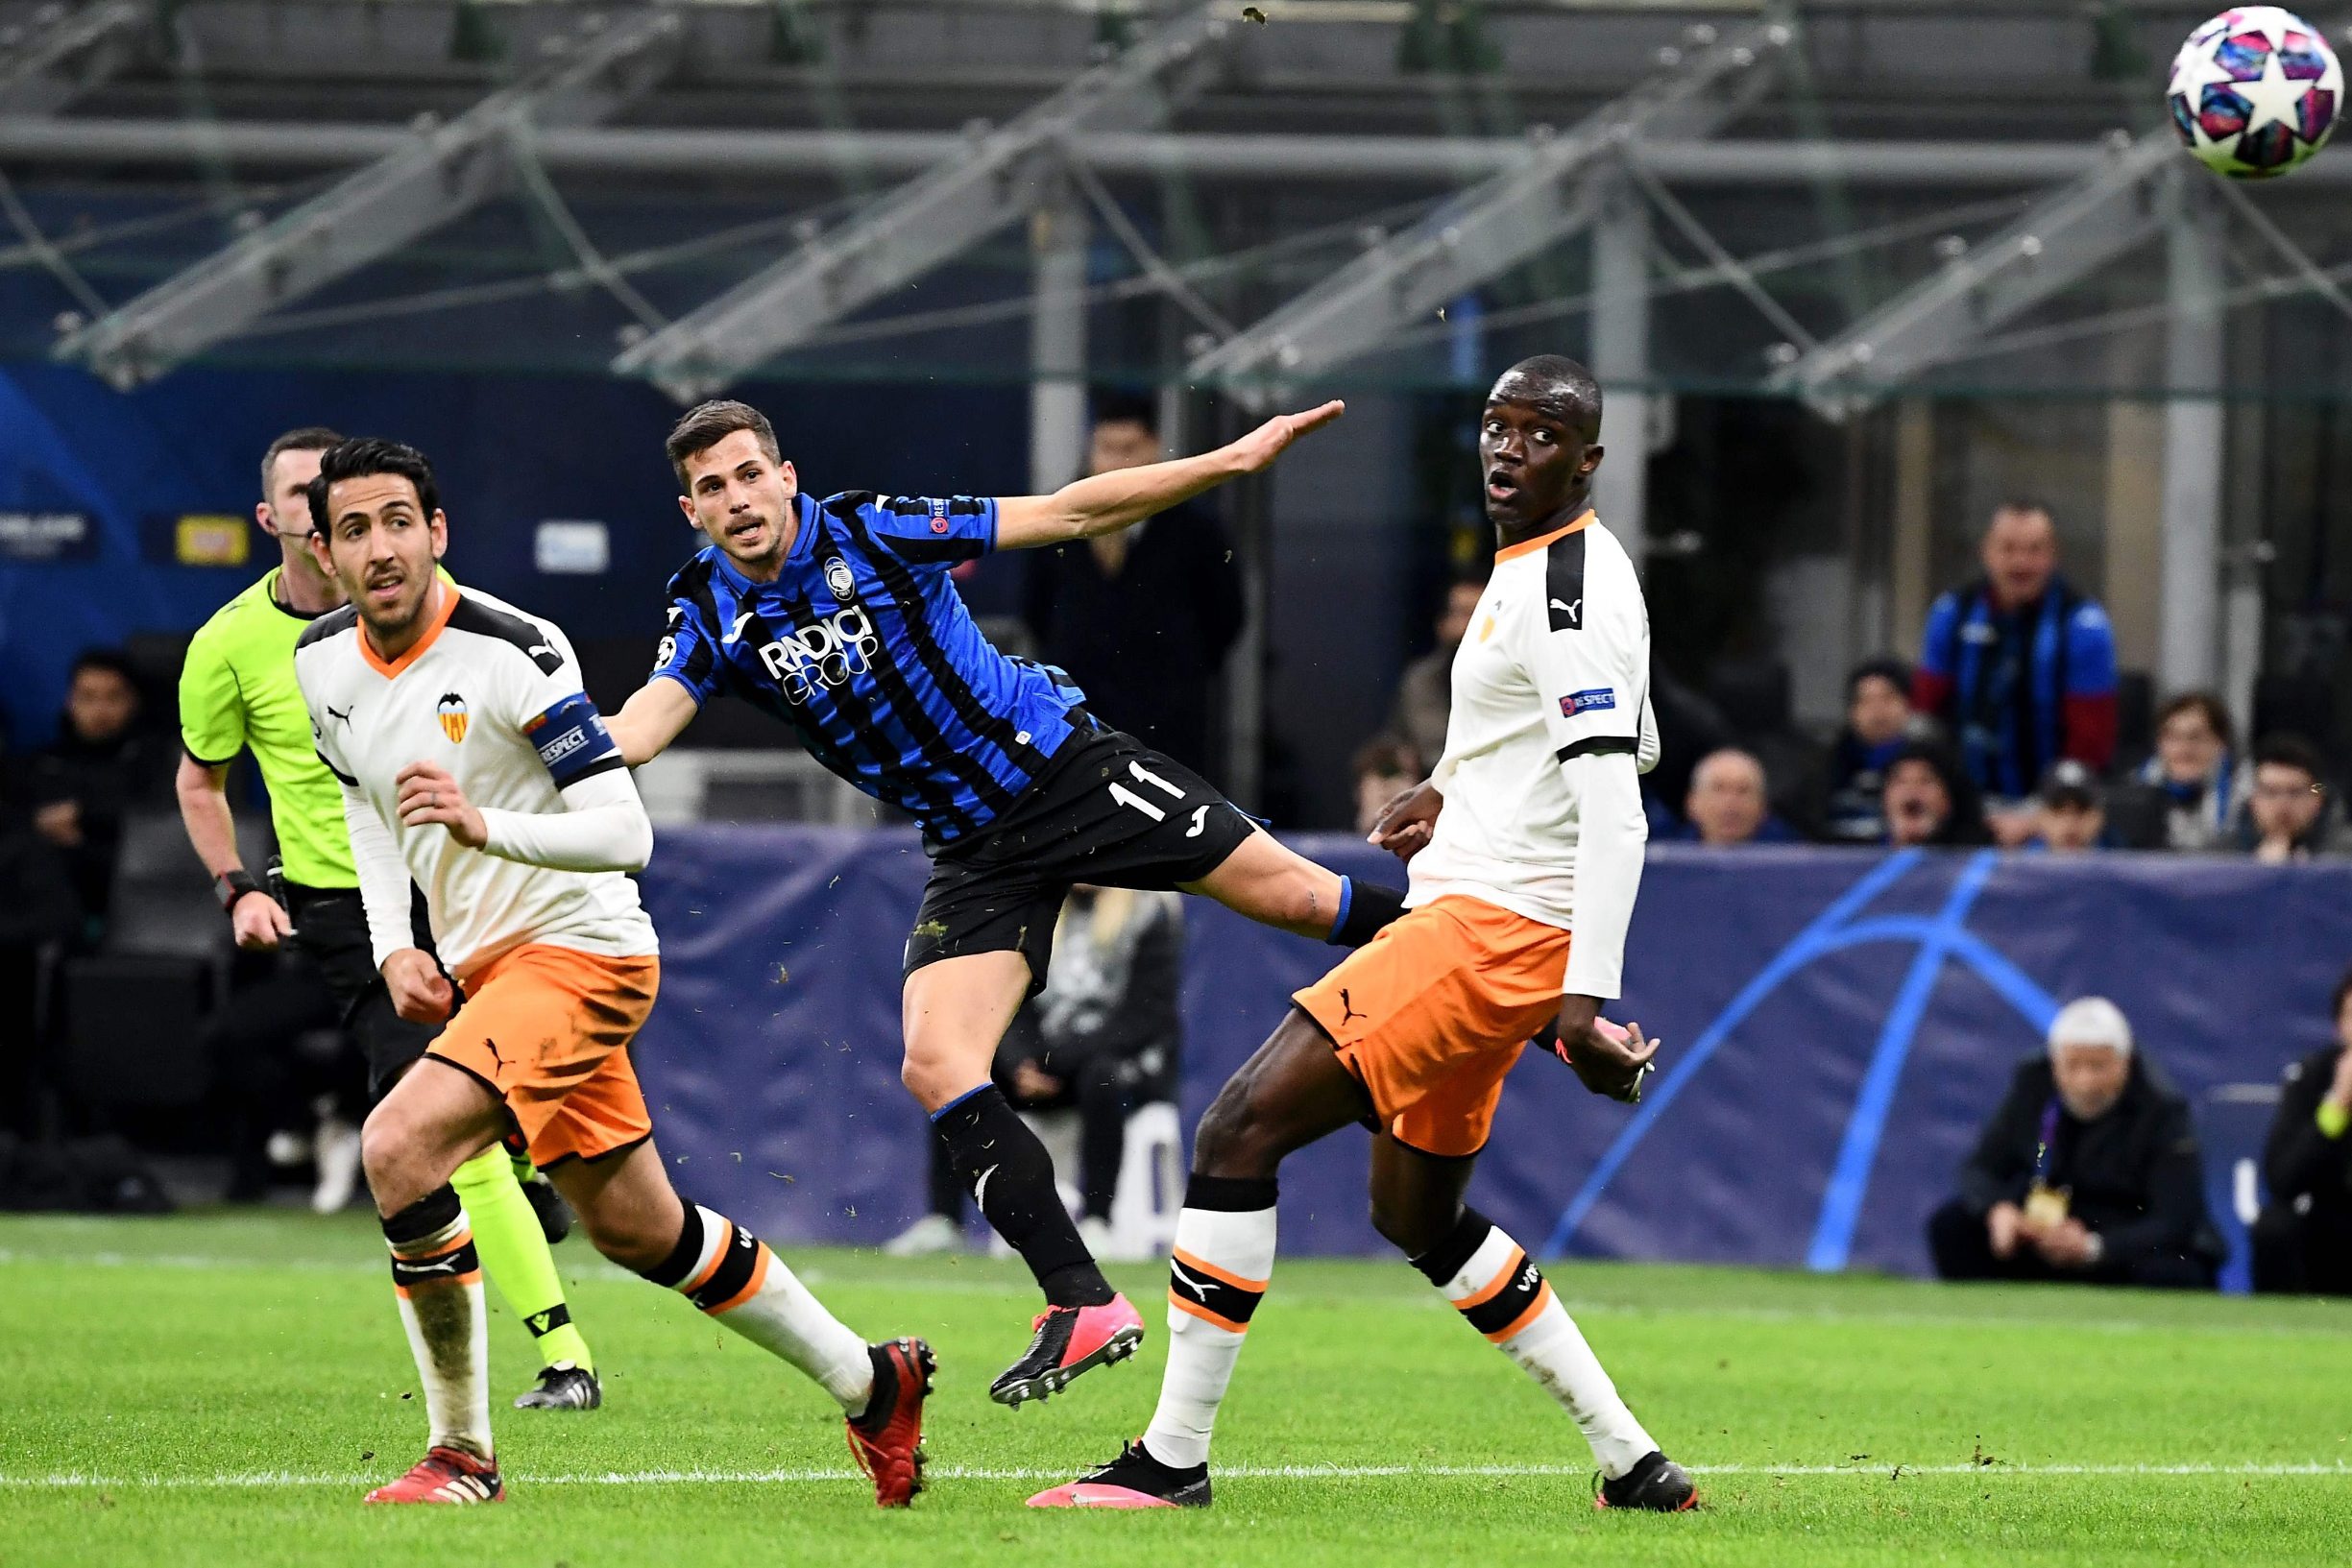 Atalanta's Swiss midfielder Remo Freuler (C) shoots to score his team's third goal during the UEFA Champions League round of 16 first leg football match Atalanta Bergamo vs Valencia on February 19, 2020 at the San Siro stadium in Milan. (Photo by Vincenzo PINTO / AFP)